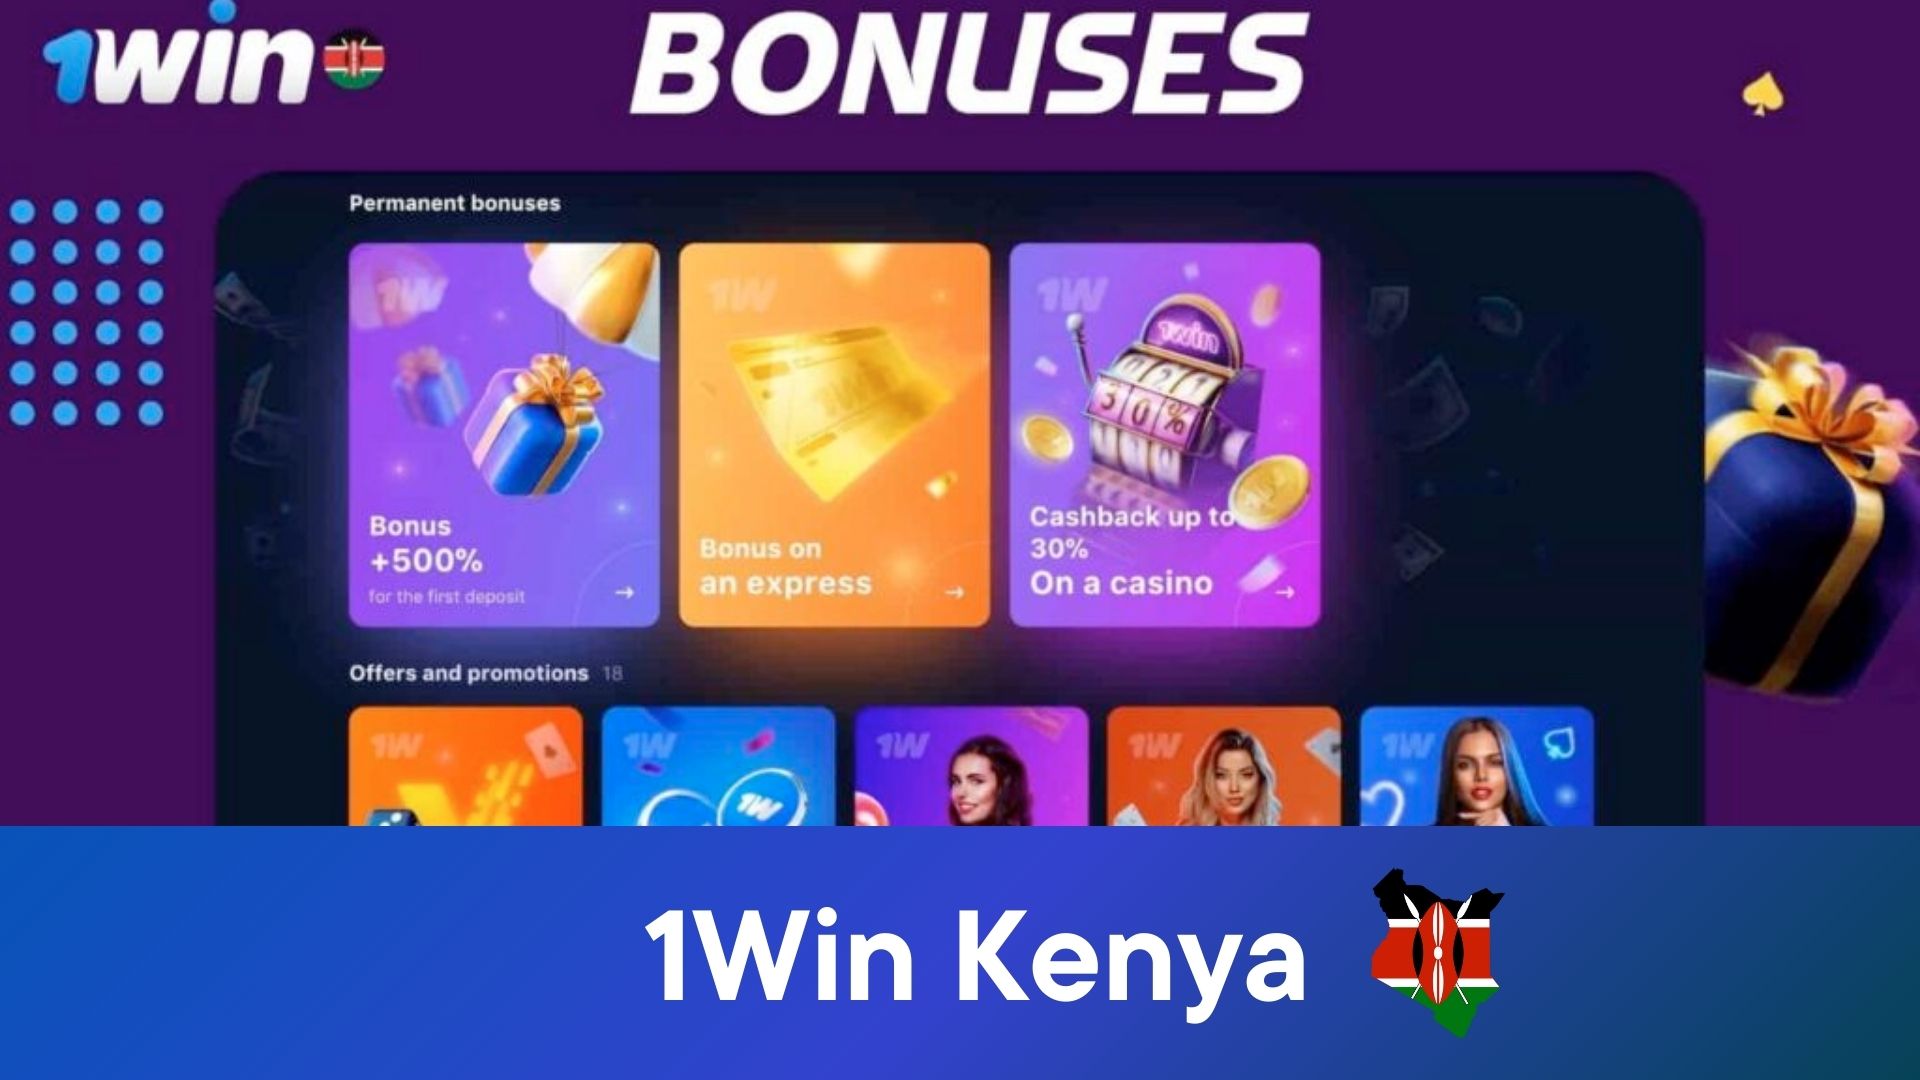 1Win Betting Site review: Bonuses and Types of Bets